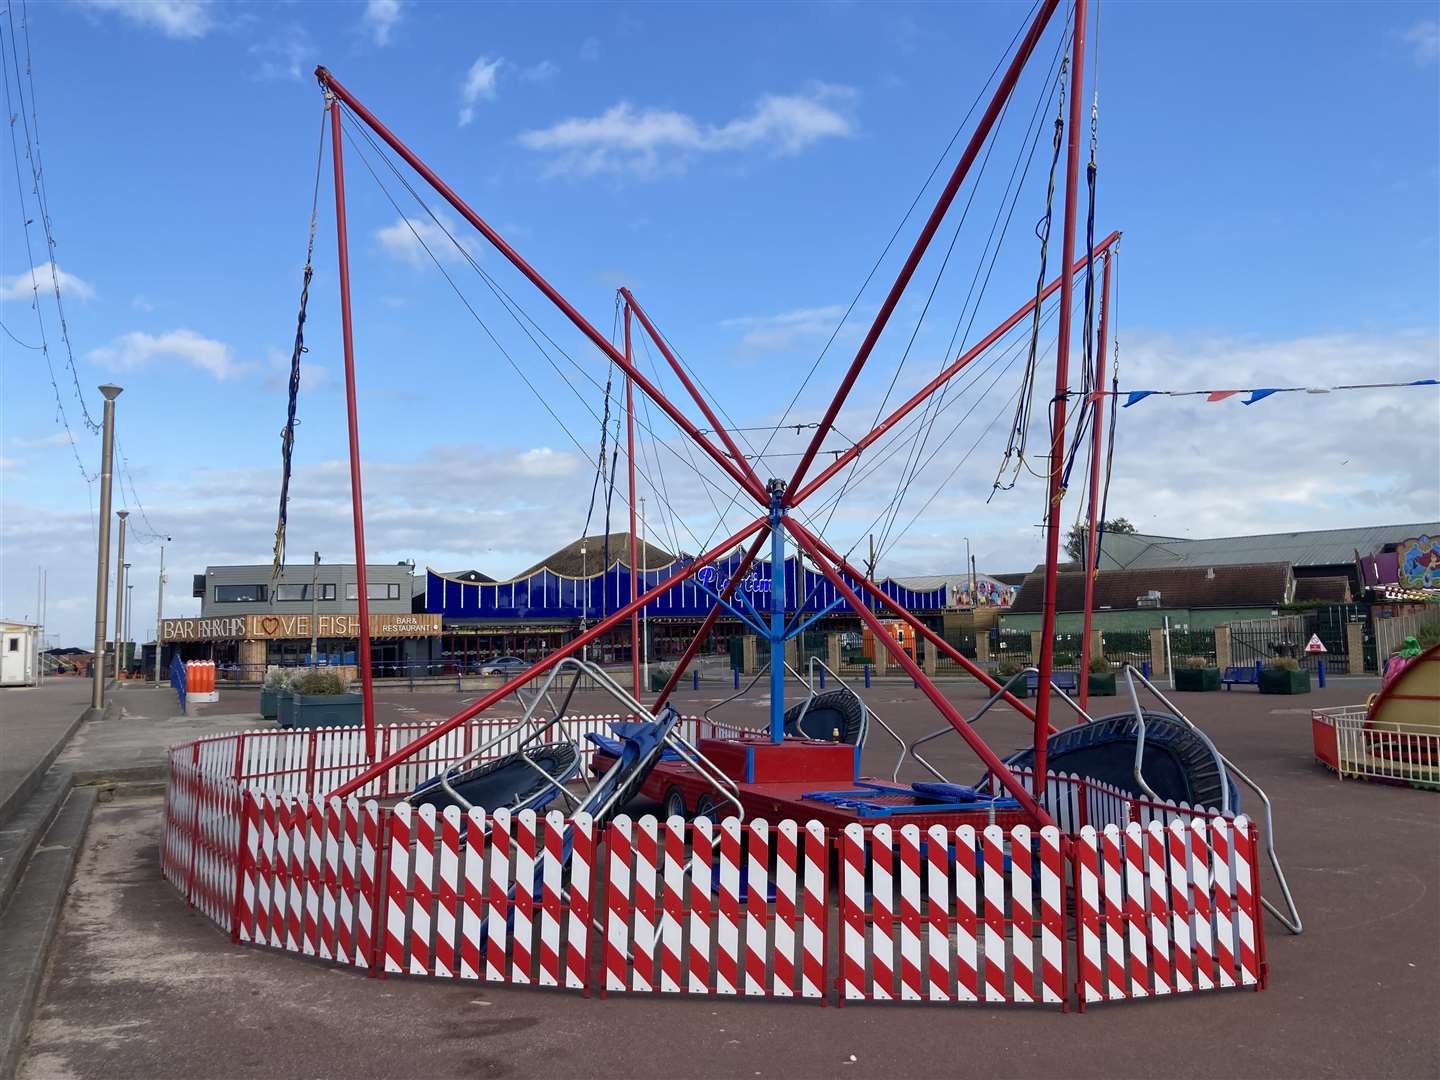 Even some of the rides at Leysdown are in red, white and blue to celebrate the Queen's Platinum Jubilee